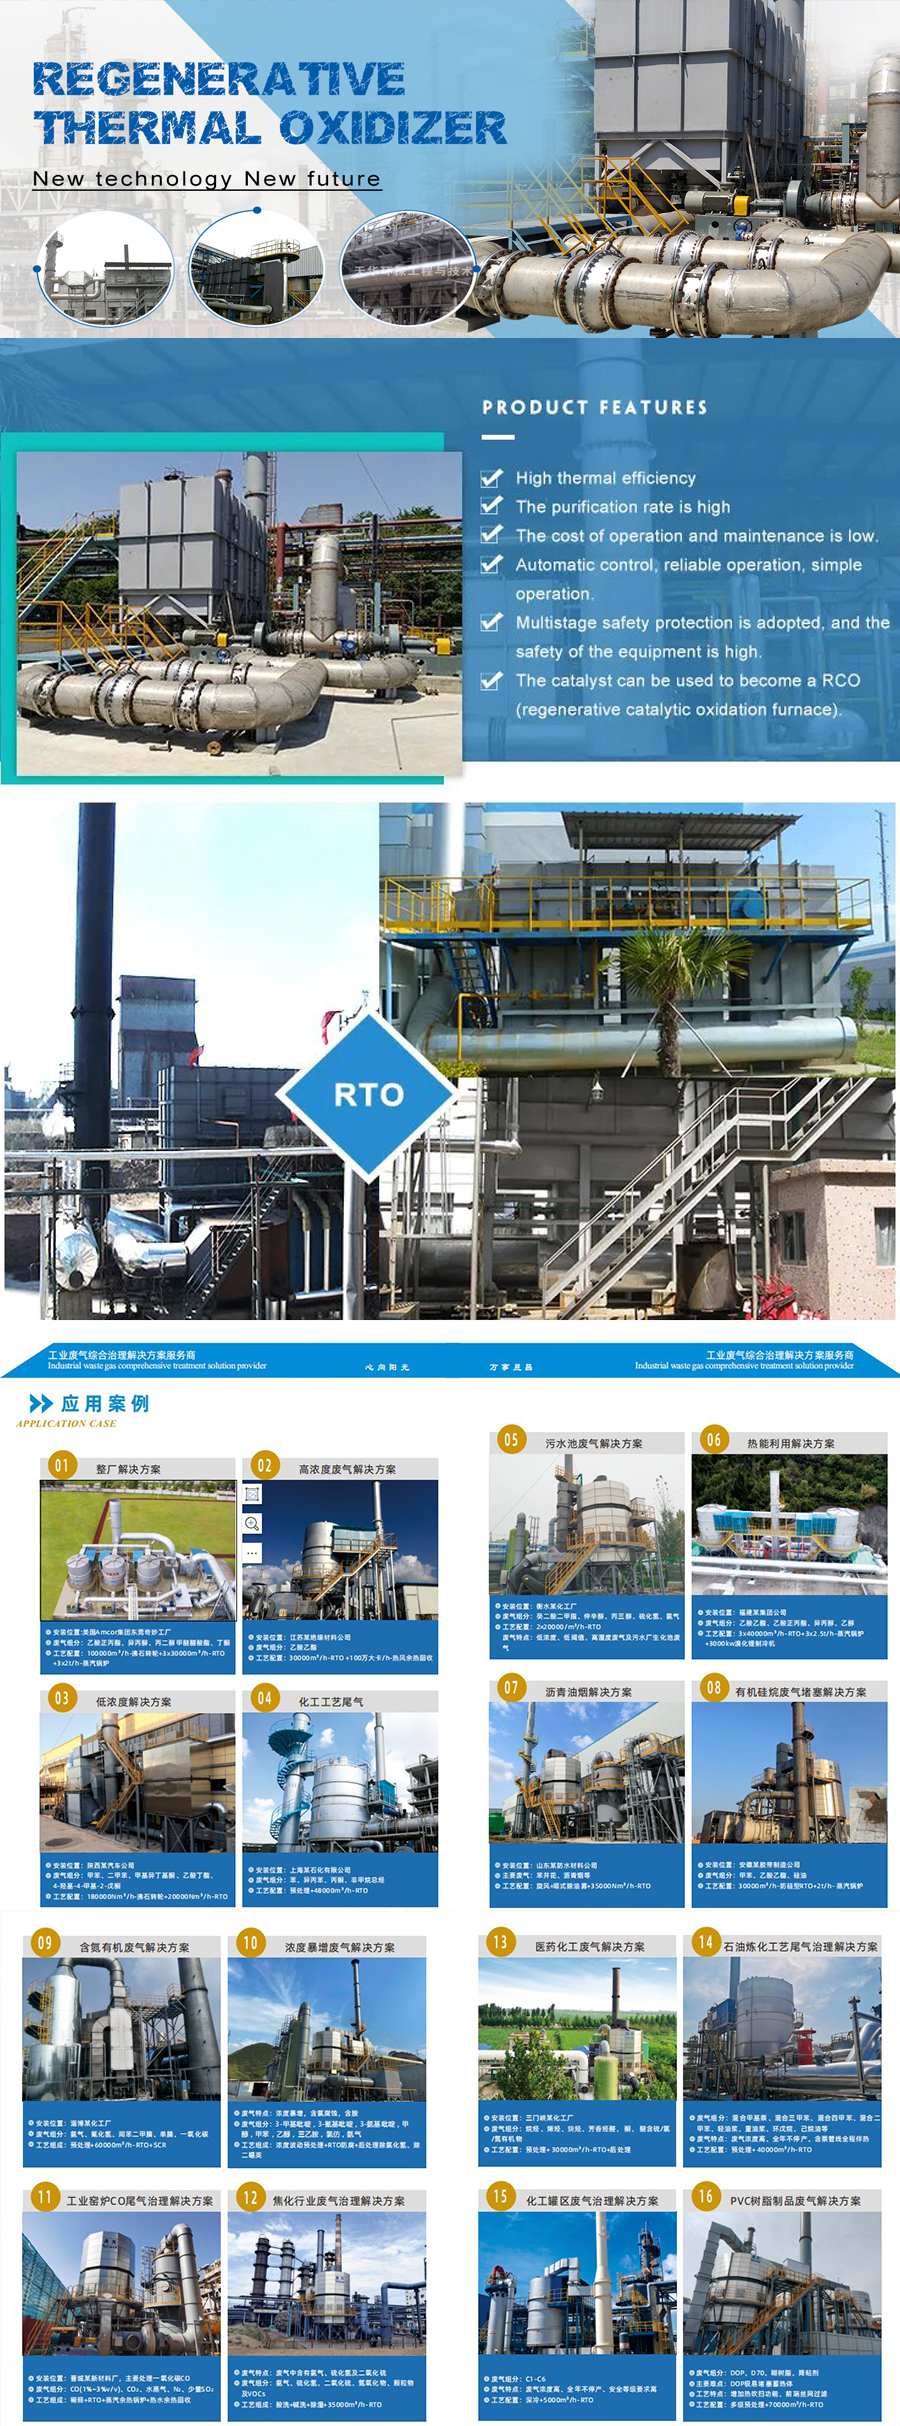 China high quality High Efficiency Regenerative Thermal Oxidizer - Rto for Exhausting Vocs  